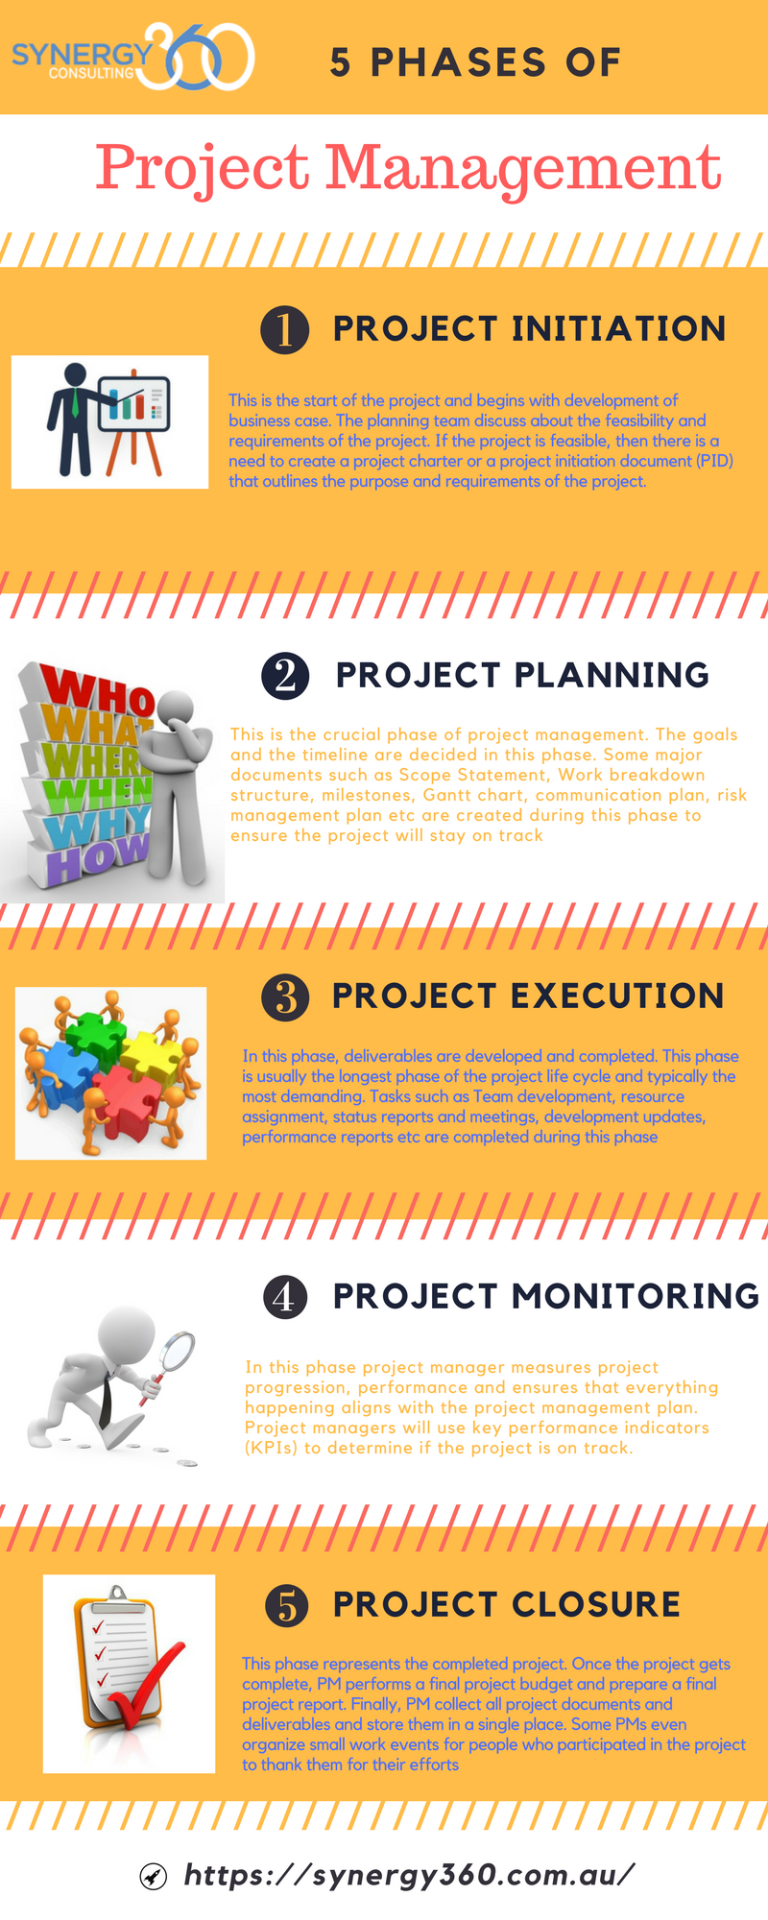 5 Phases of Project Management | Infographic Post